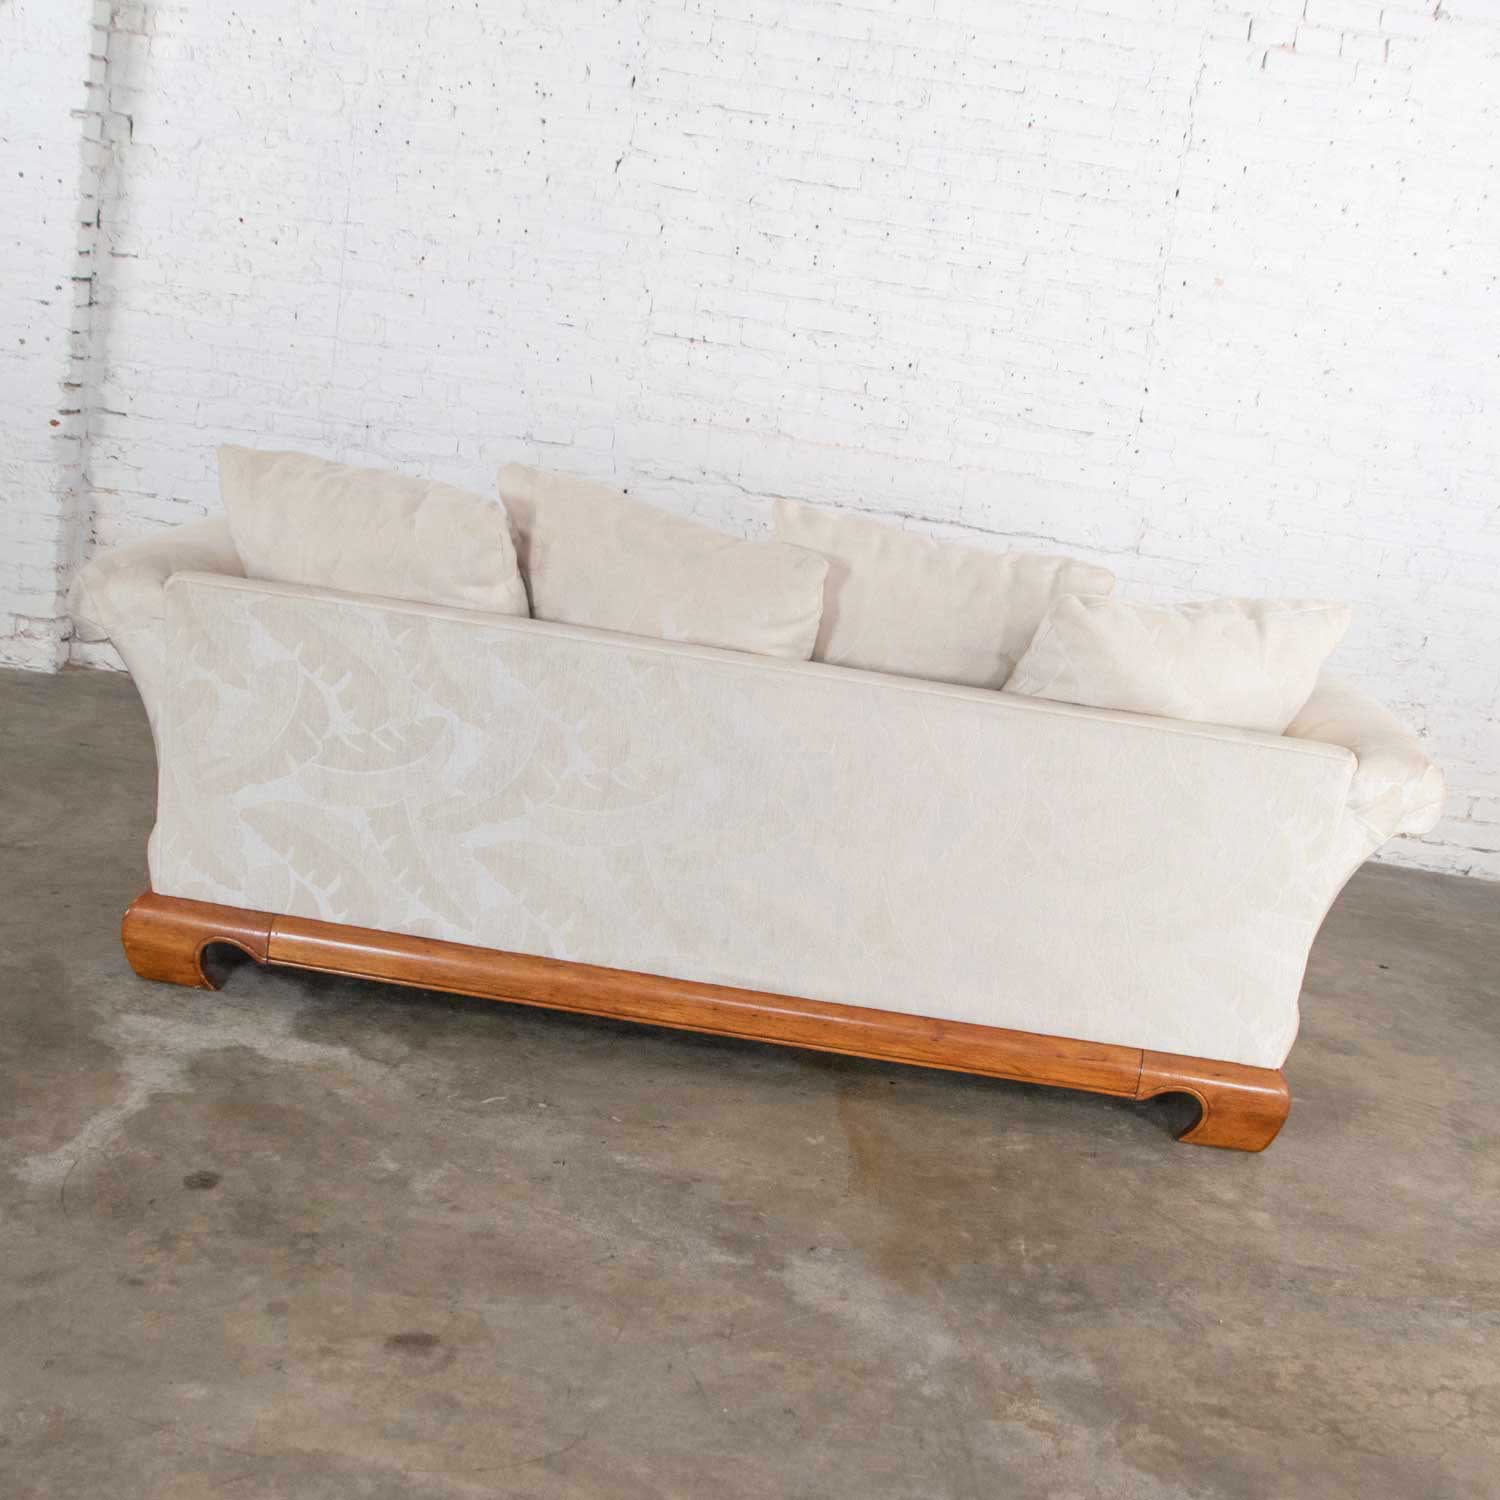 Chinoiserie Chow Leg Ming Style Sofa by Schnadig International Furniture Hollywood Regency Flair